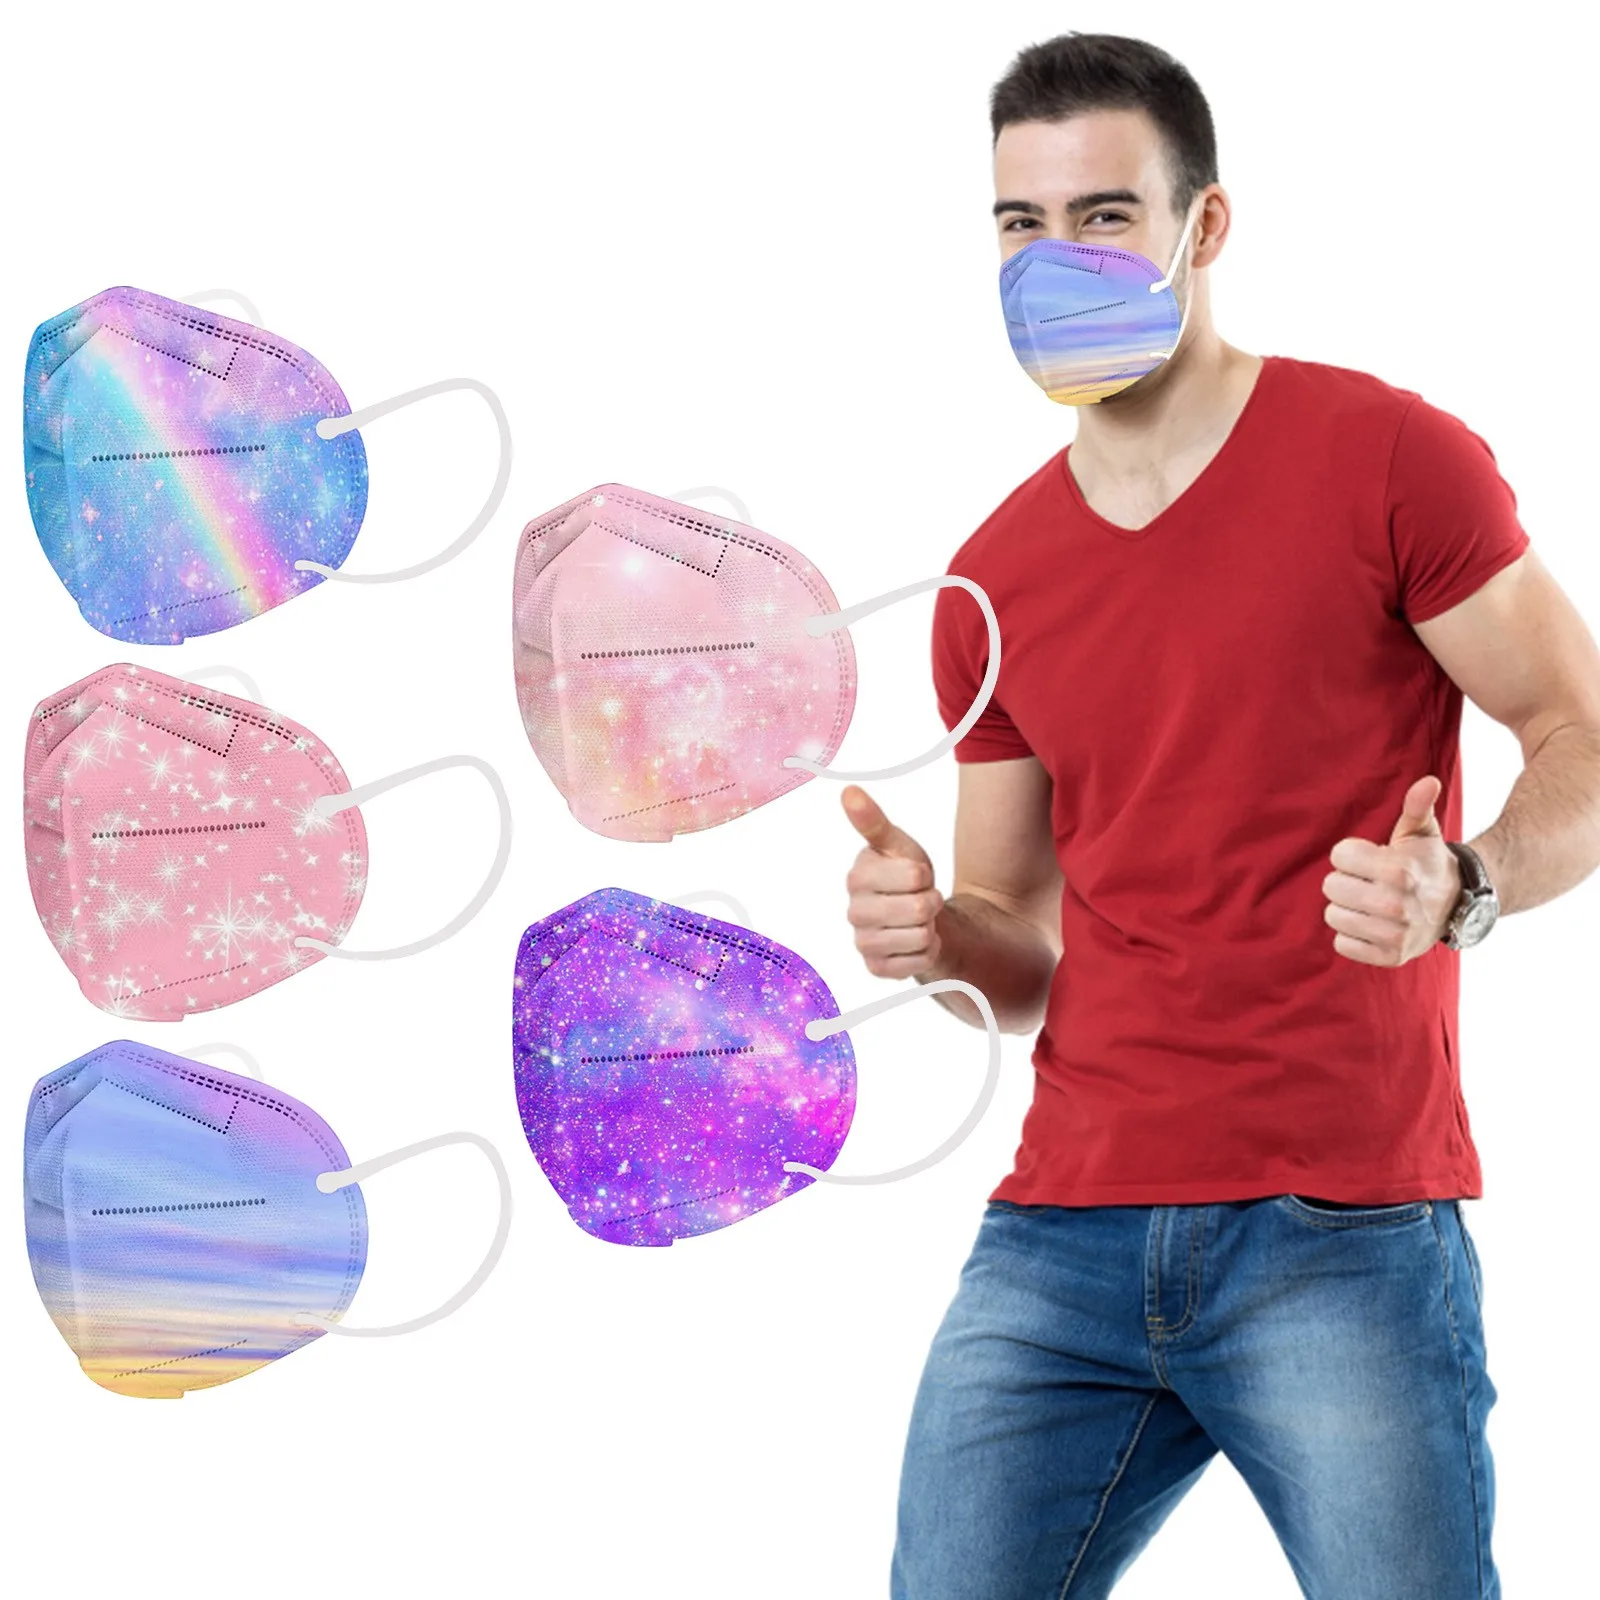 

50pcs Children Adult Reusable Face Mask 5-layer High-density Mask Pm2.5 Wind And Mist Pollution Protection Filter Party Mask